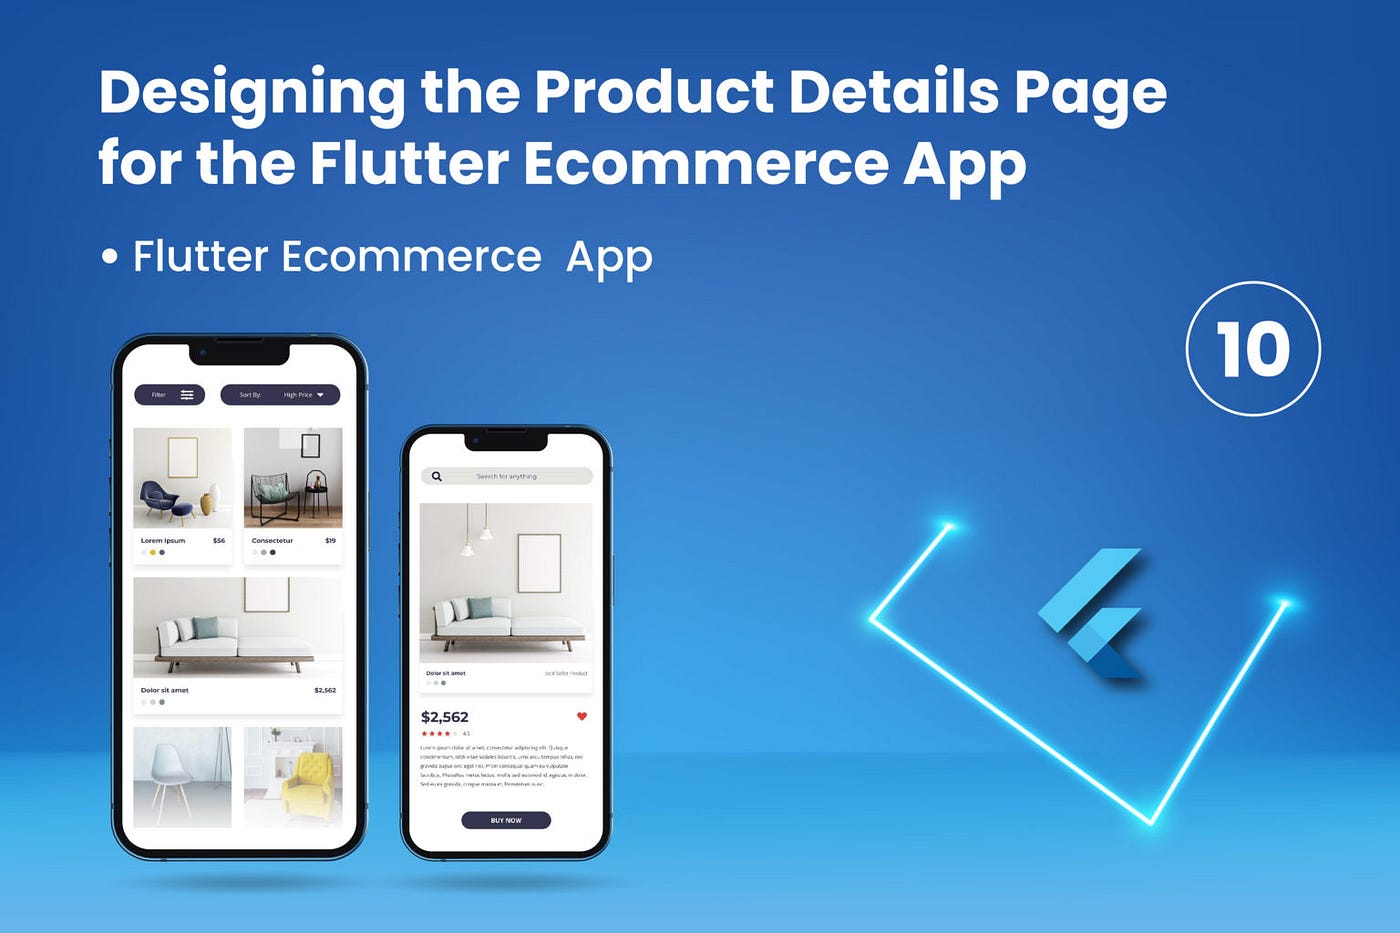 Designing the Product Details Page for the Flutter Ecommerce App